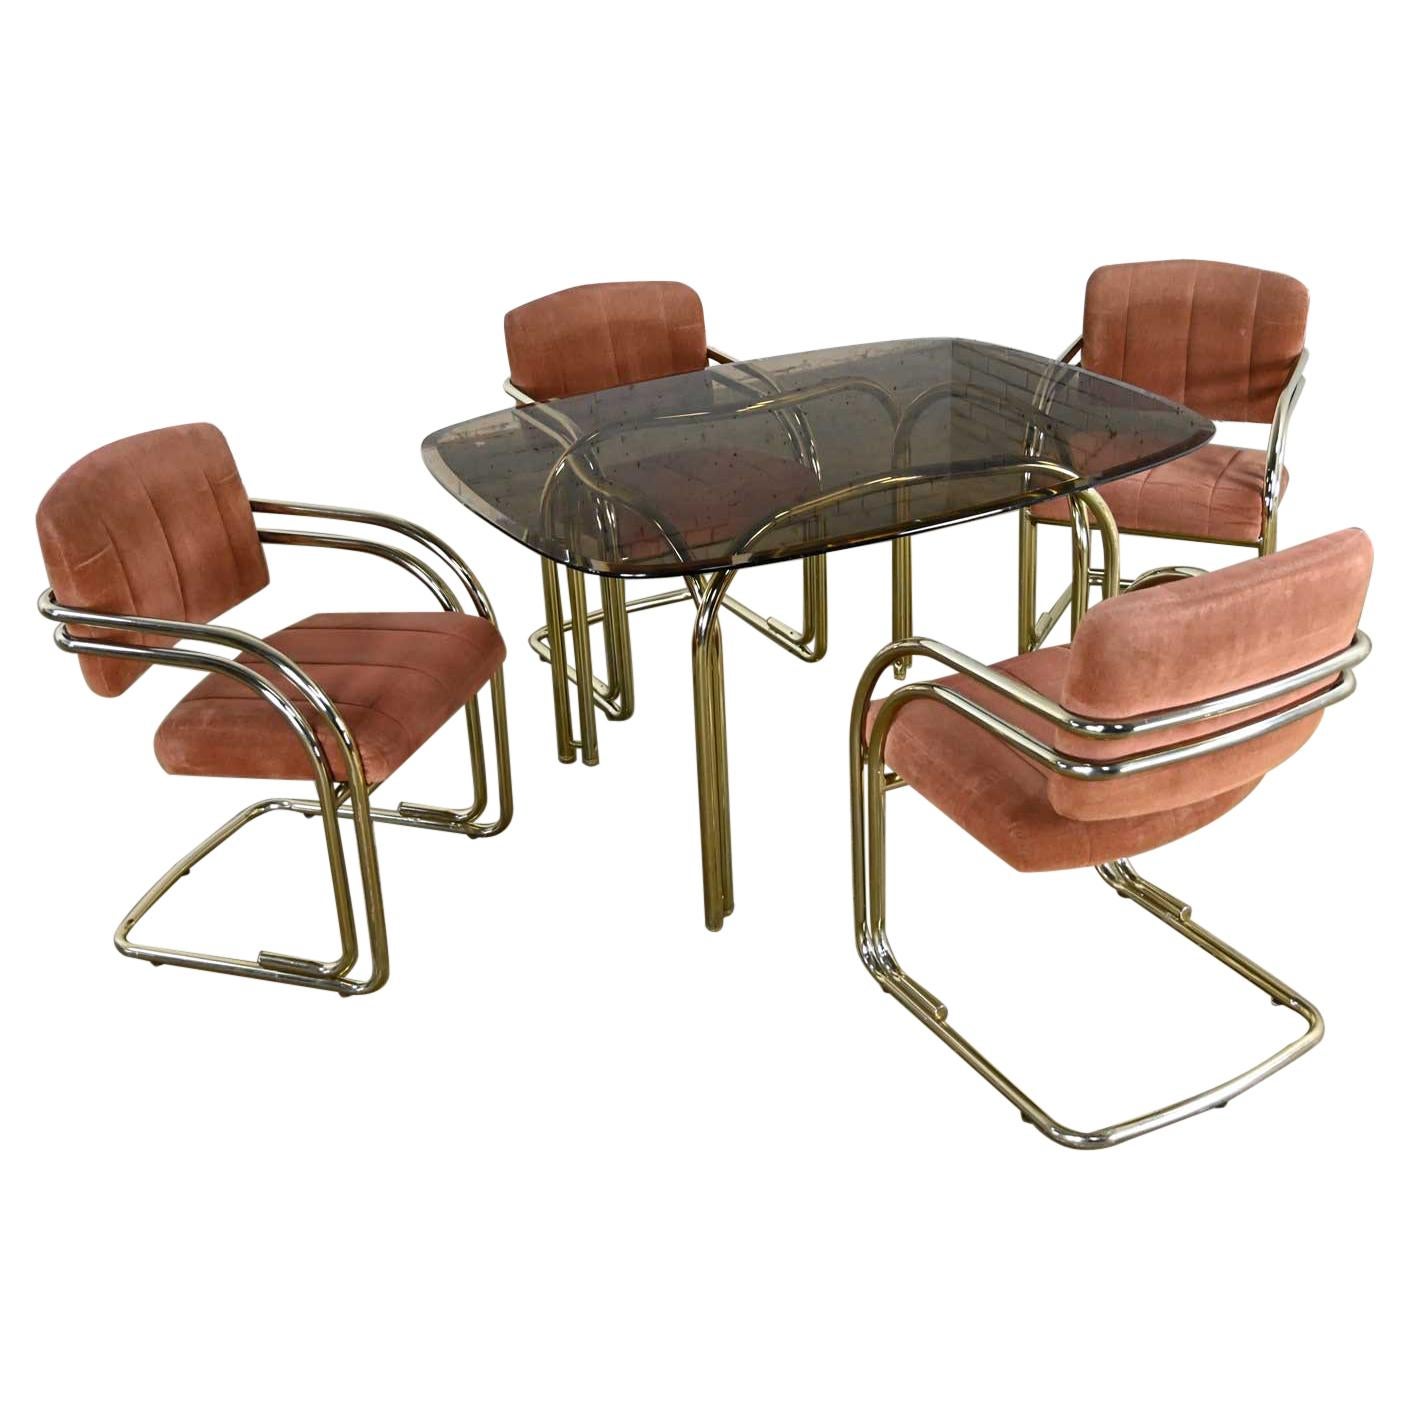 Double Tube Brass Plate Cantilever Chairs Smoked Glass Top Table by Douglas Furn